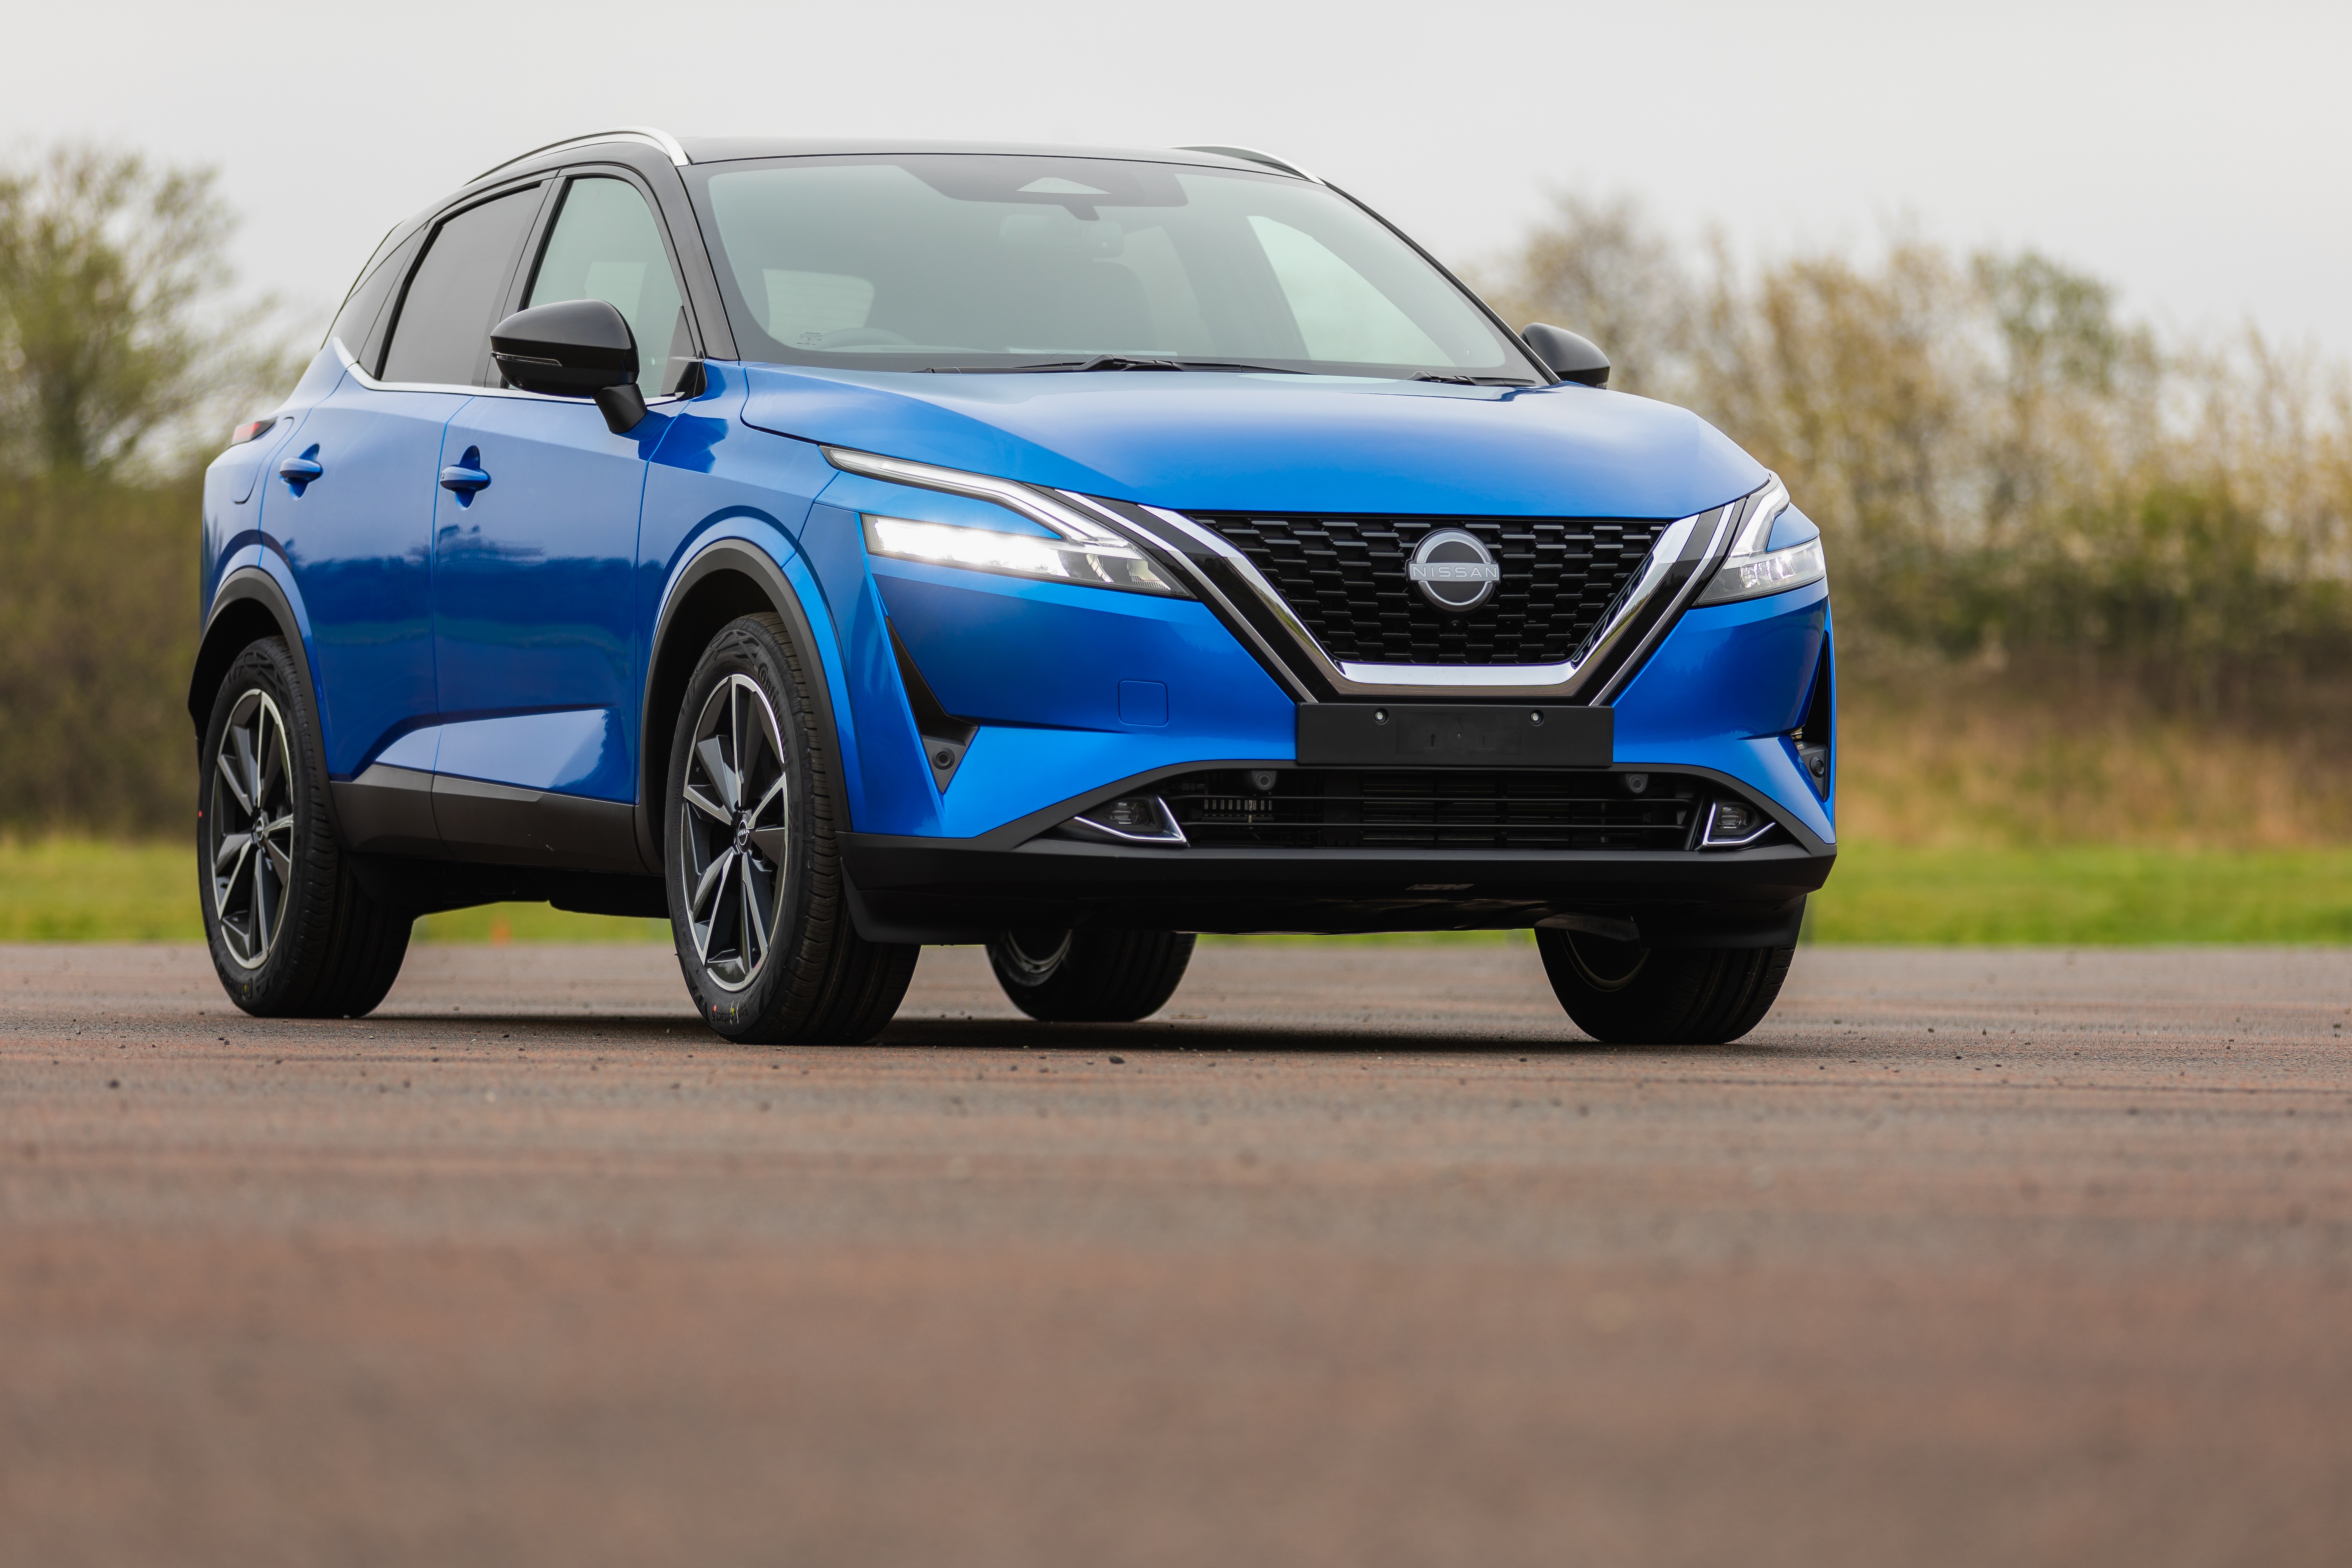 Enhancements To Nissan’s All-Conquering Qashqai